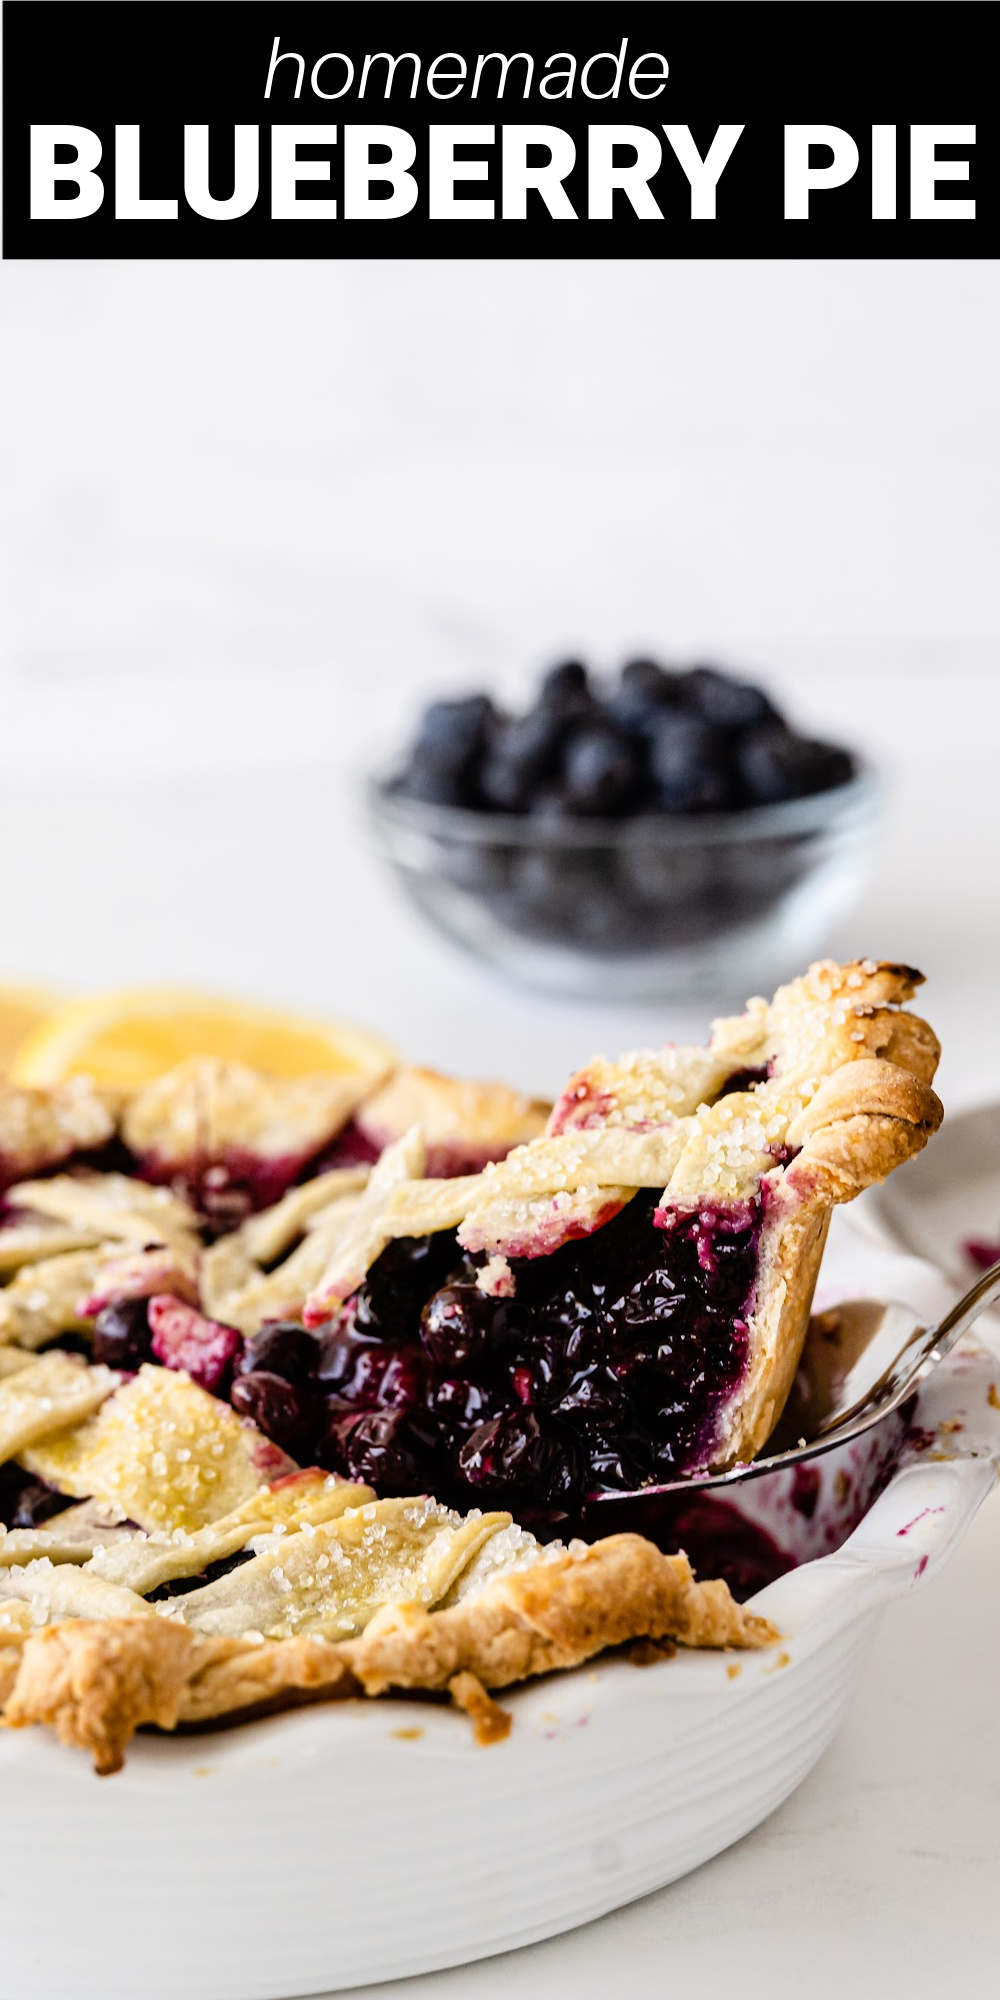 Homemade Blueberry Pie is a classic summer dessert staple with juicy blueberries and a homemade pie crust with a lattice pattern on top. This dessert is so fresh and delicious, it’s perfect for spring and summer get togethers, BBQs, Memorial Day and the Fourth of July.